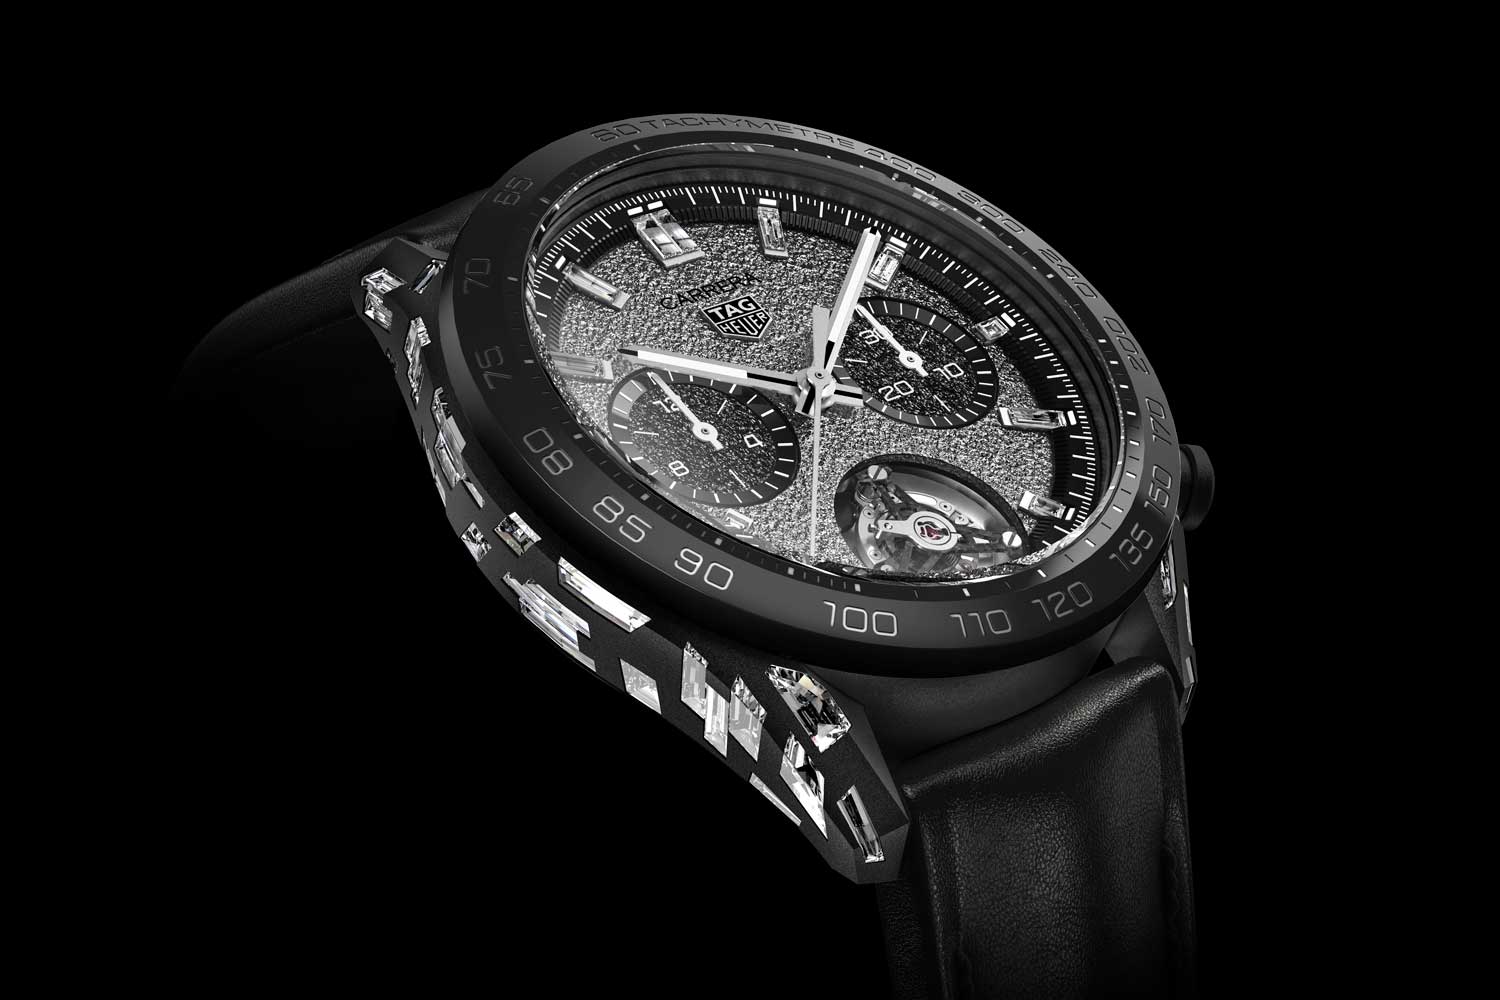 With a novel case made from aluminium set with specially grown diamonds, this watch is hard to miss